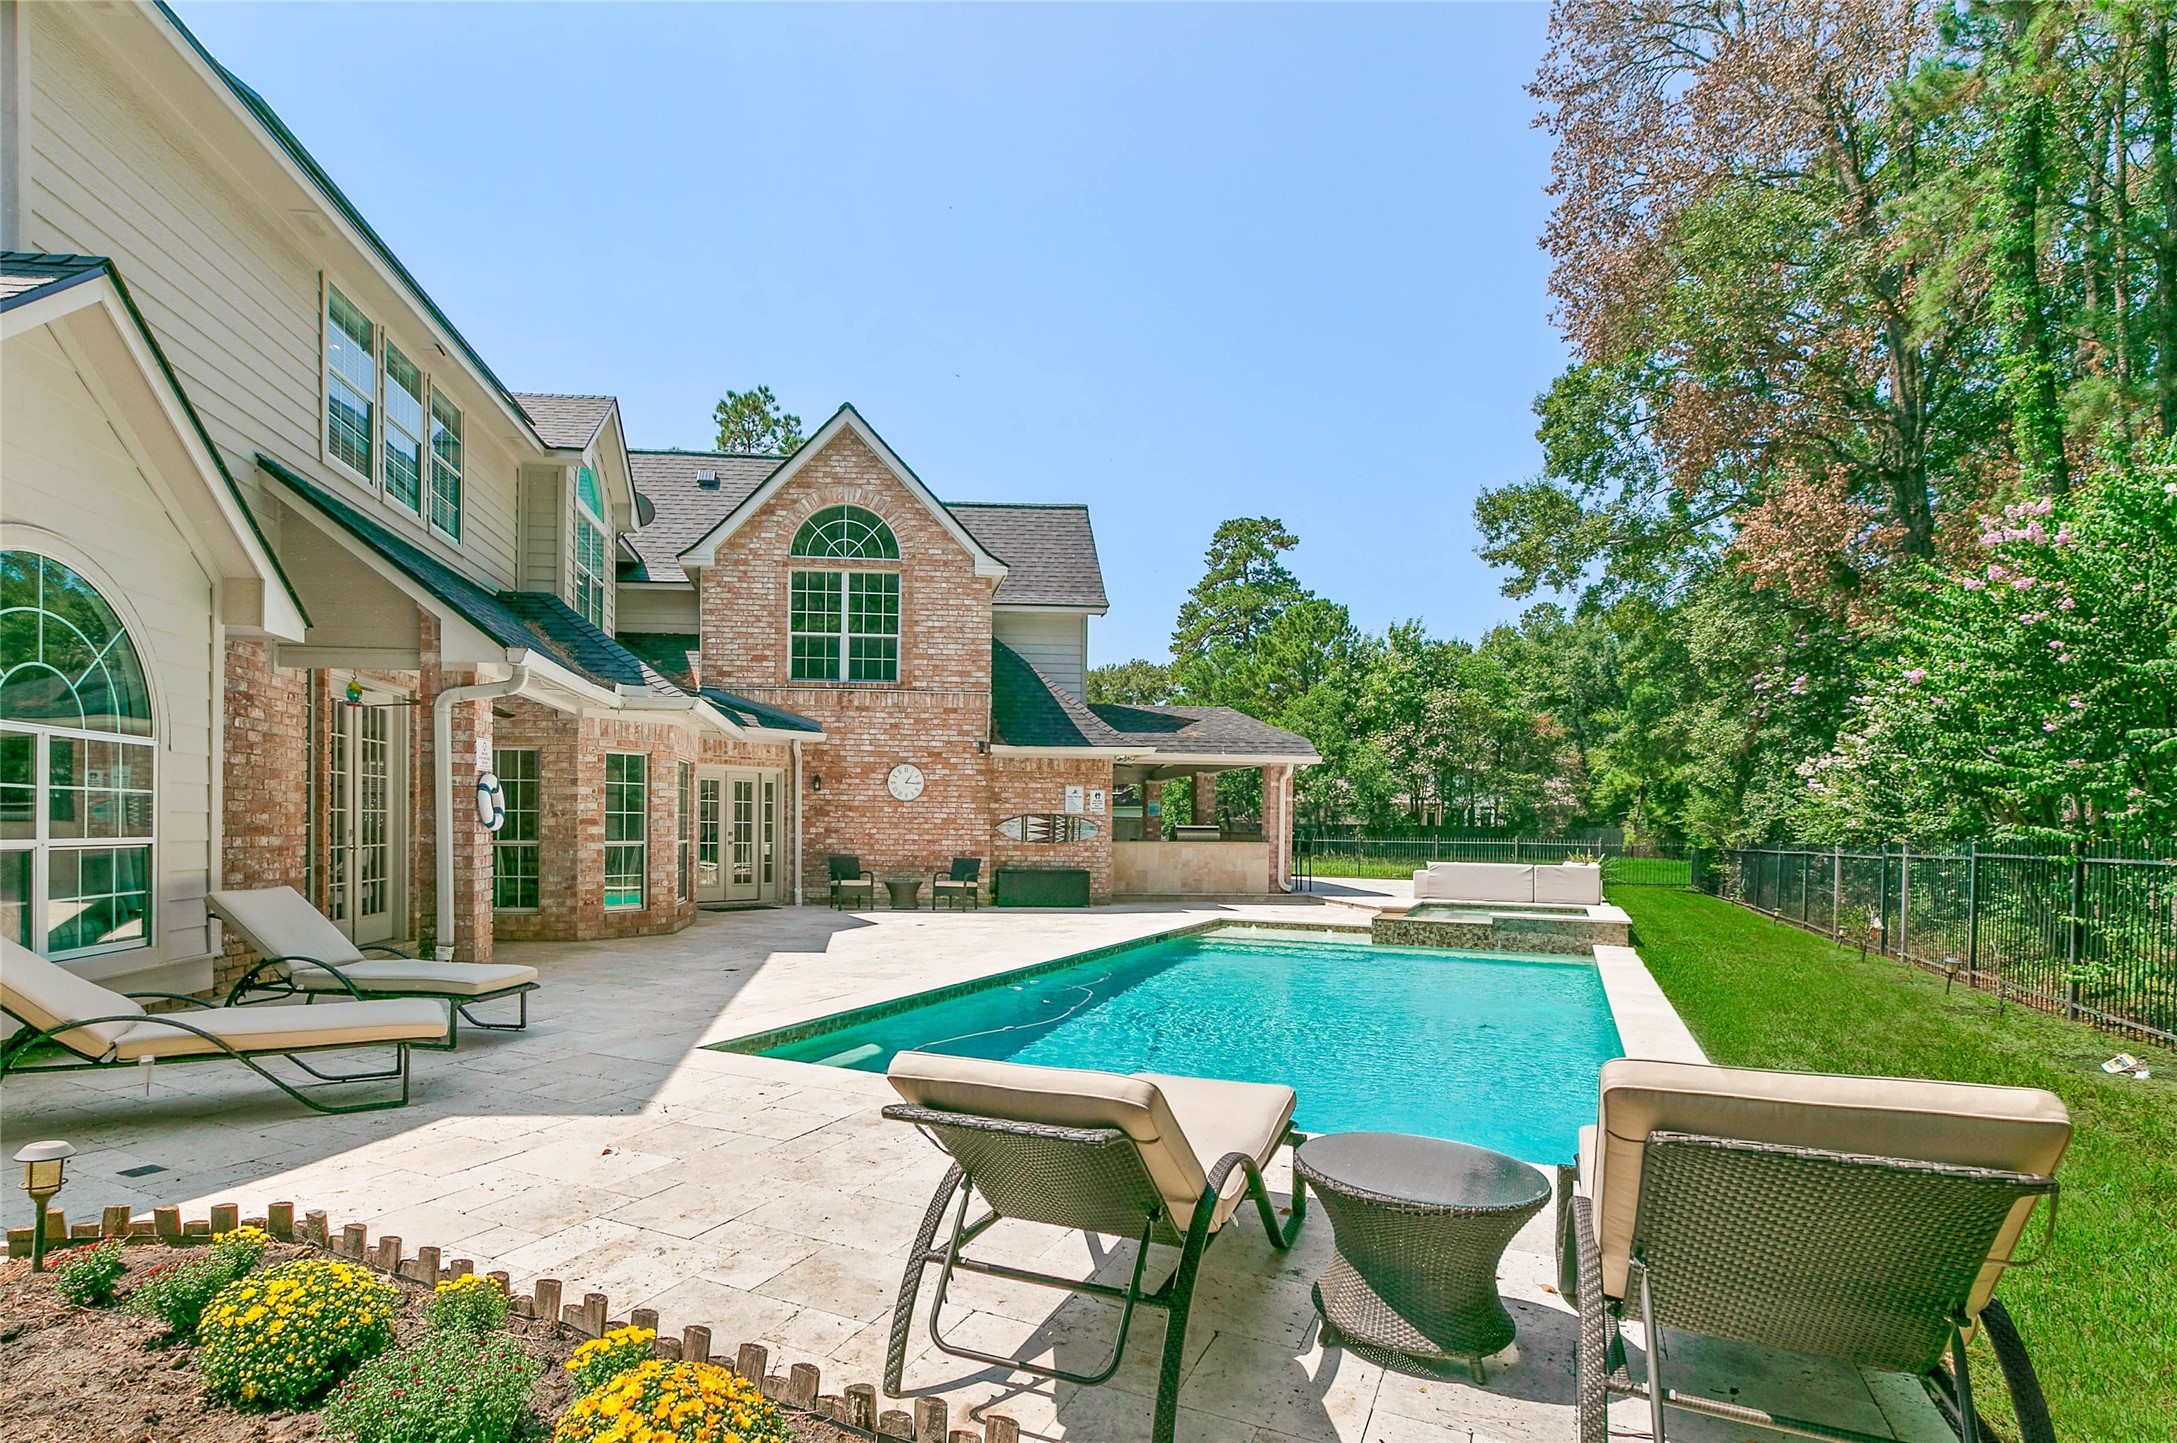 Plus, this gorgeous home enjoys the privacy of having no back neighbors and a forest greenbelt.